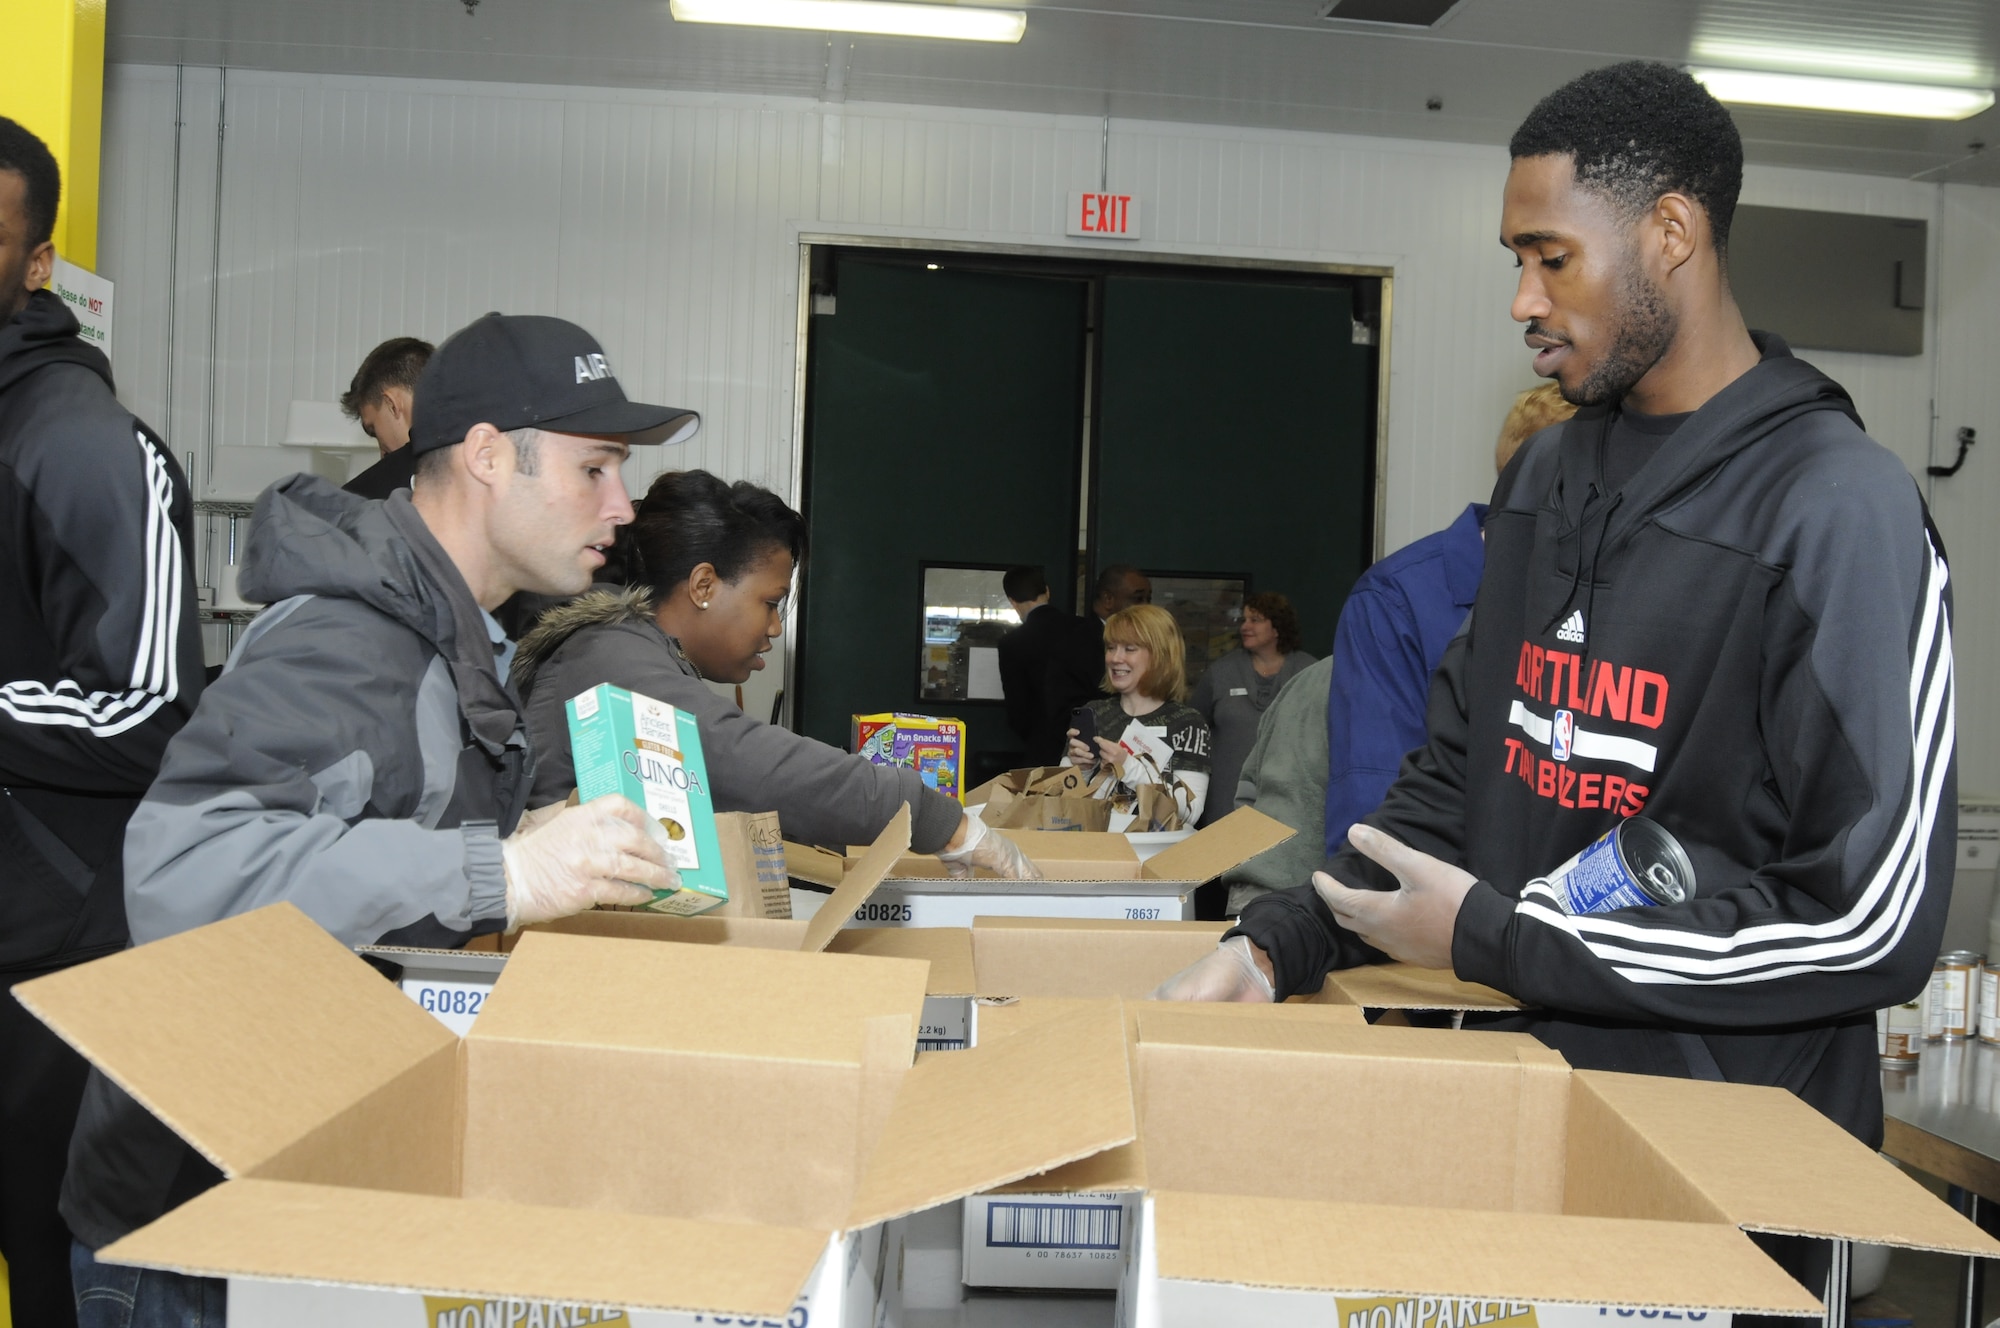 Tech. Sgt. Jacob Goodwin, a recruiter with Oregon National Guard Joint Force Headquarters who is stationed in Portland, works with Will Barton, a guard for the Portland Trail Blazers, as they pack food boxes to support the Oregon Food Bank. (U.S. Air National Guard photo by Capt. Angela Walz, 142nd Fighter Wing Public Affairs)